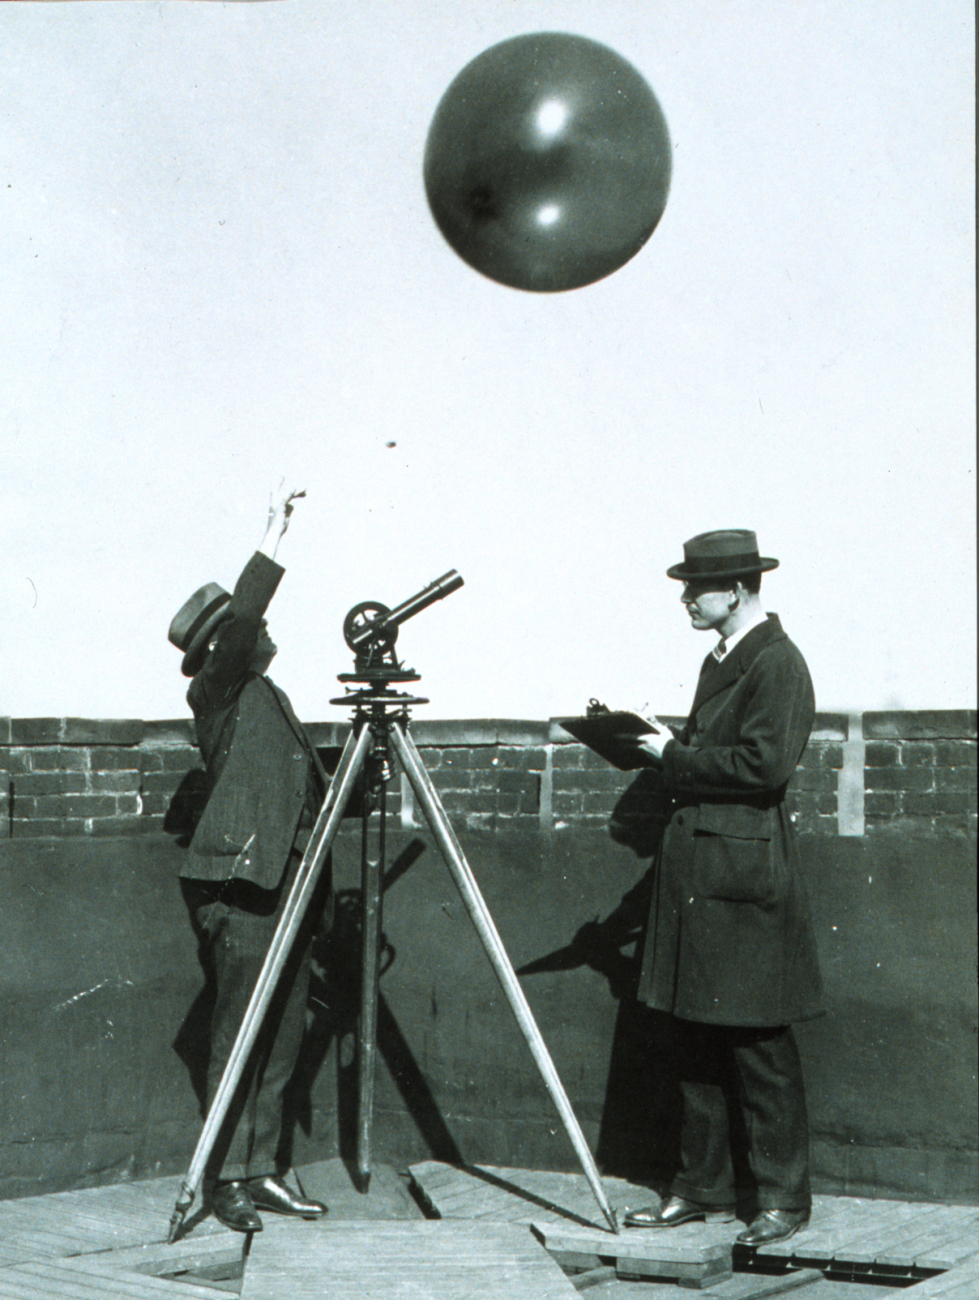 Early testing of hydrogen filled balloons for radiosonde measurementsTheodolite used to track balloon to limit of visibility